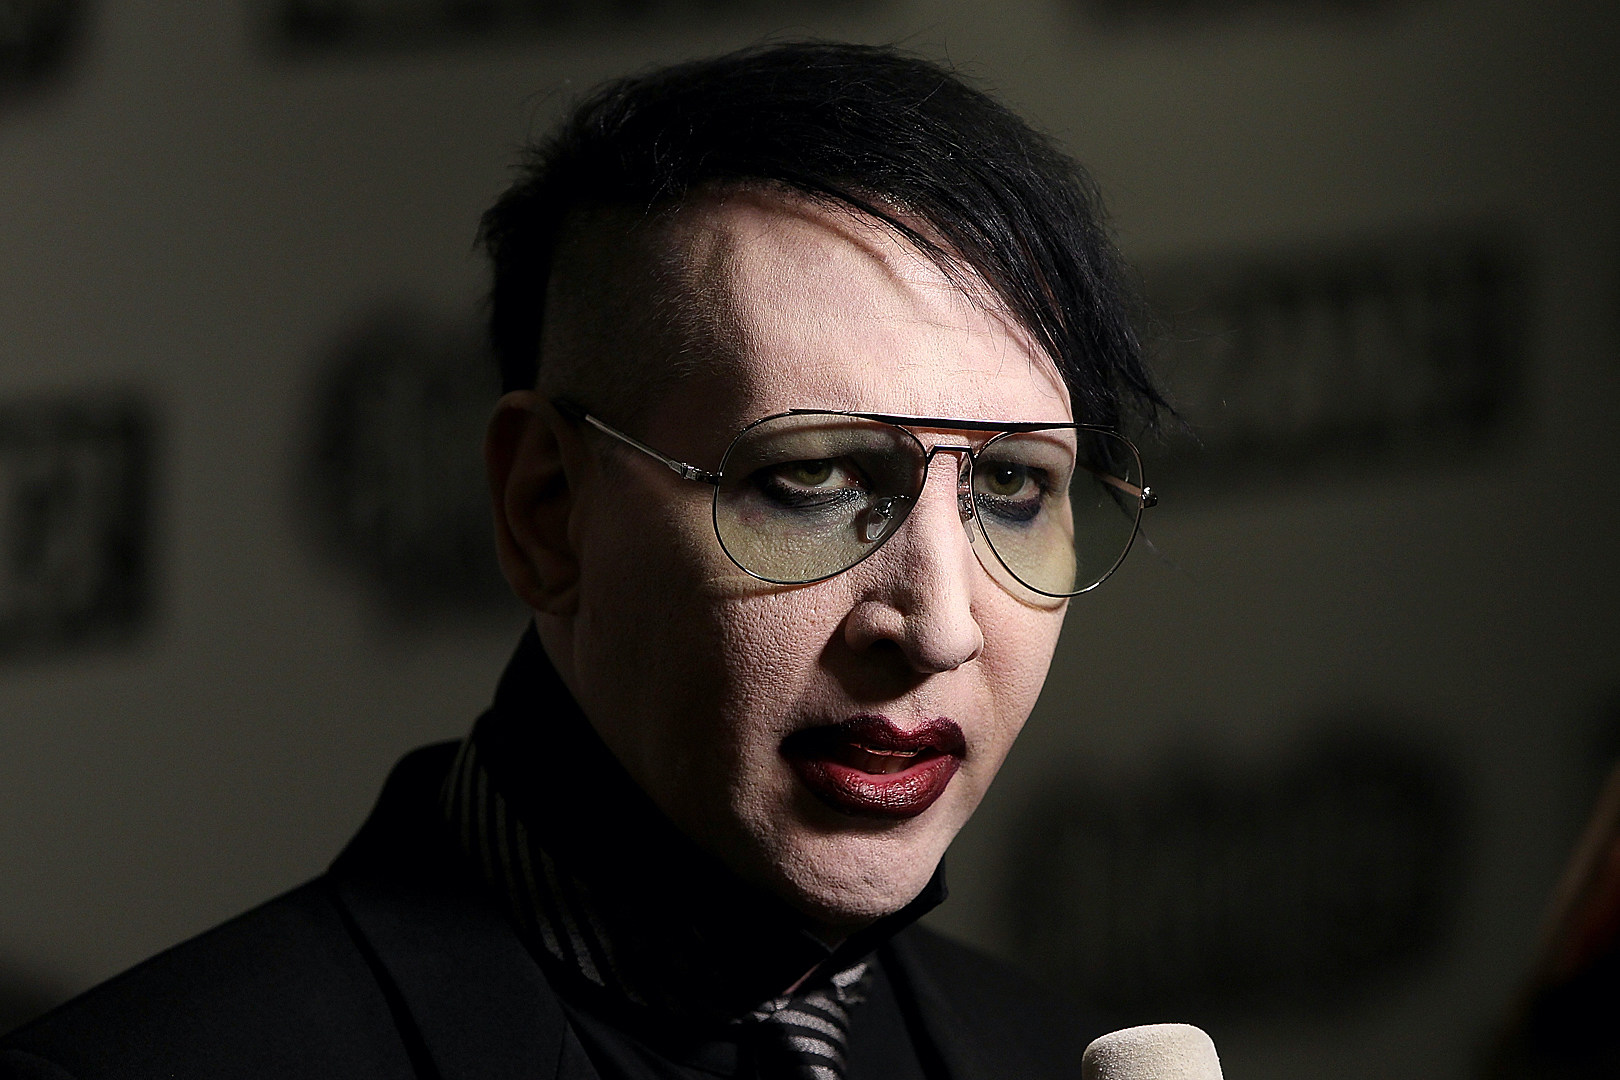 Marilyn Manson Lawsuit Over Spitting Claim Lands Back in Court